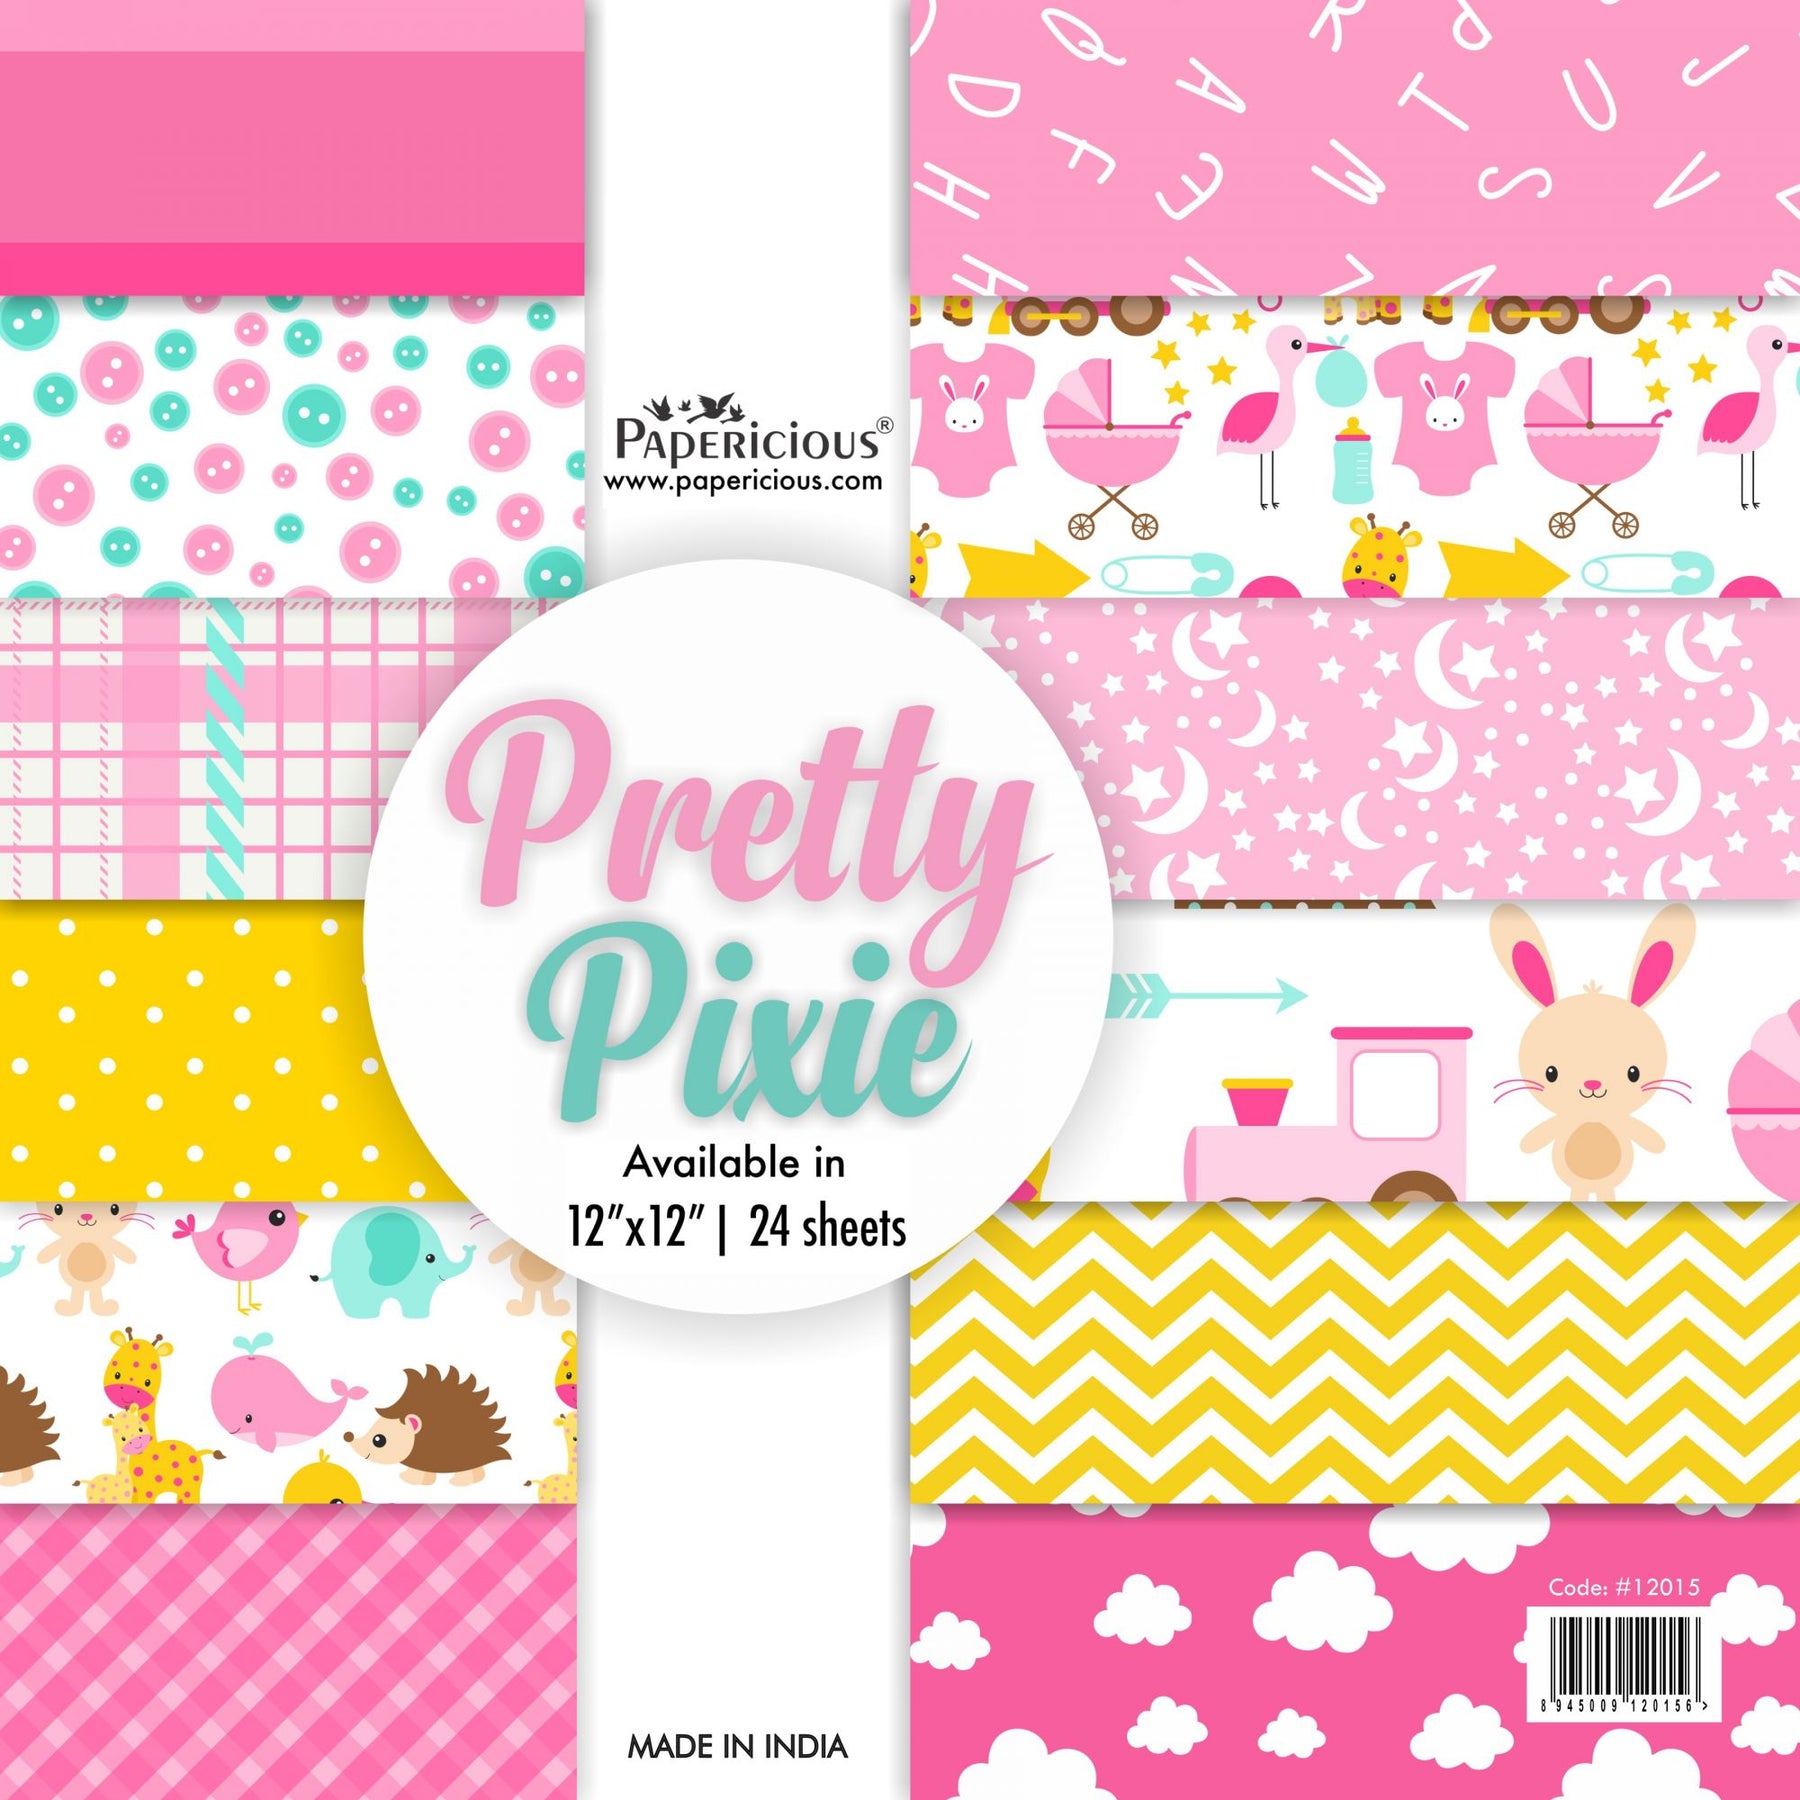 PAPERICIOUS - Pretty Pixie -  Designer Pattern Printed Scrapbook Papers / 24 sheets